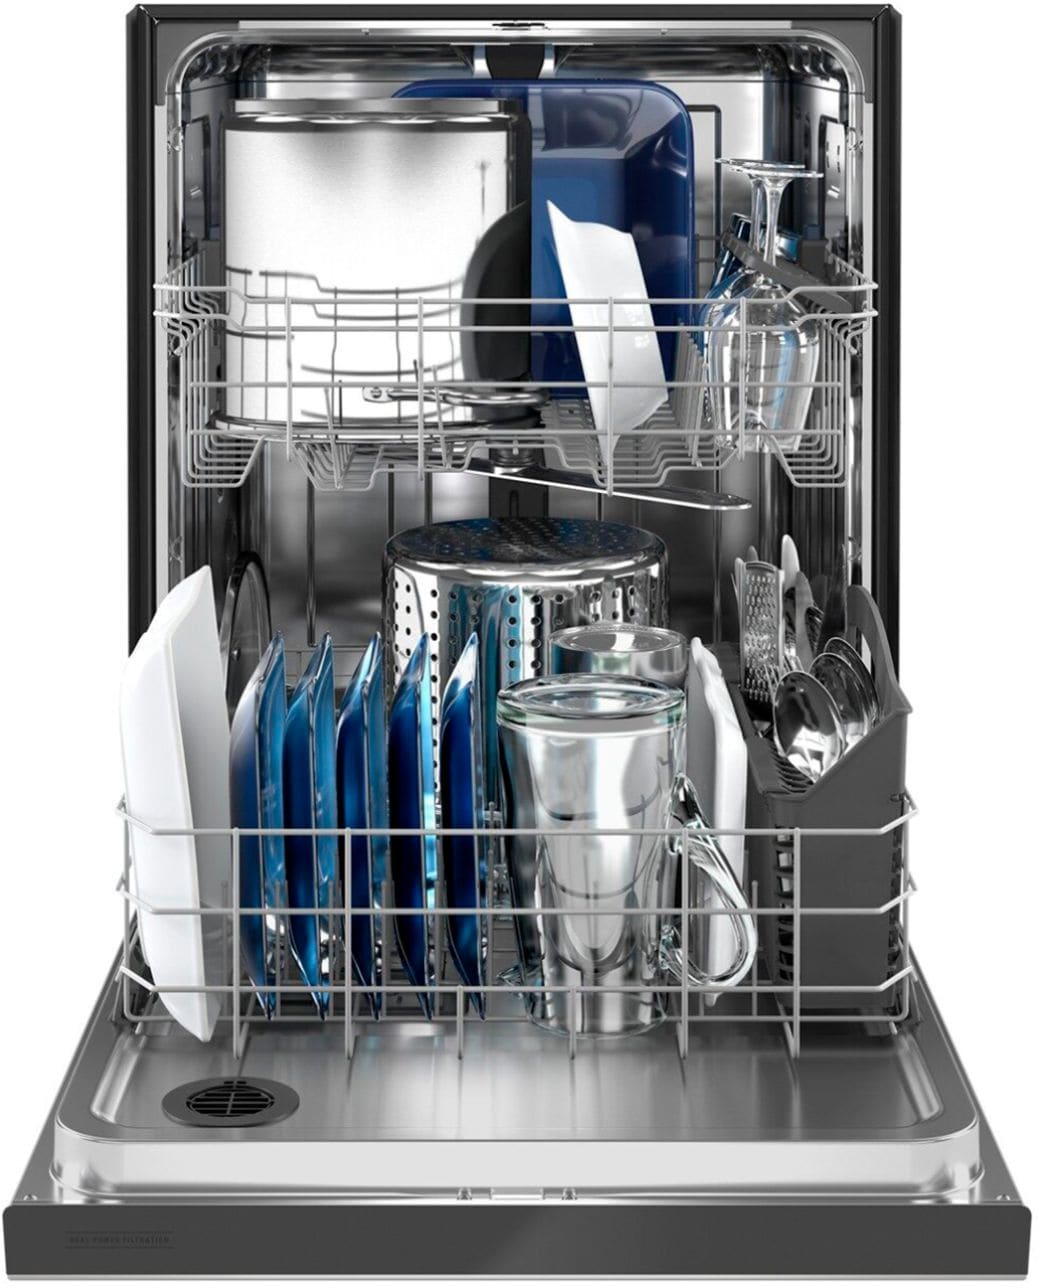 Maytag - 24" Front Control Built-In Dishwasher with Stainless Steel Tub, Dual Power Filtration, 50 dBA - Stainless steel_17